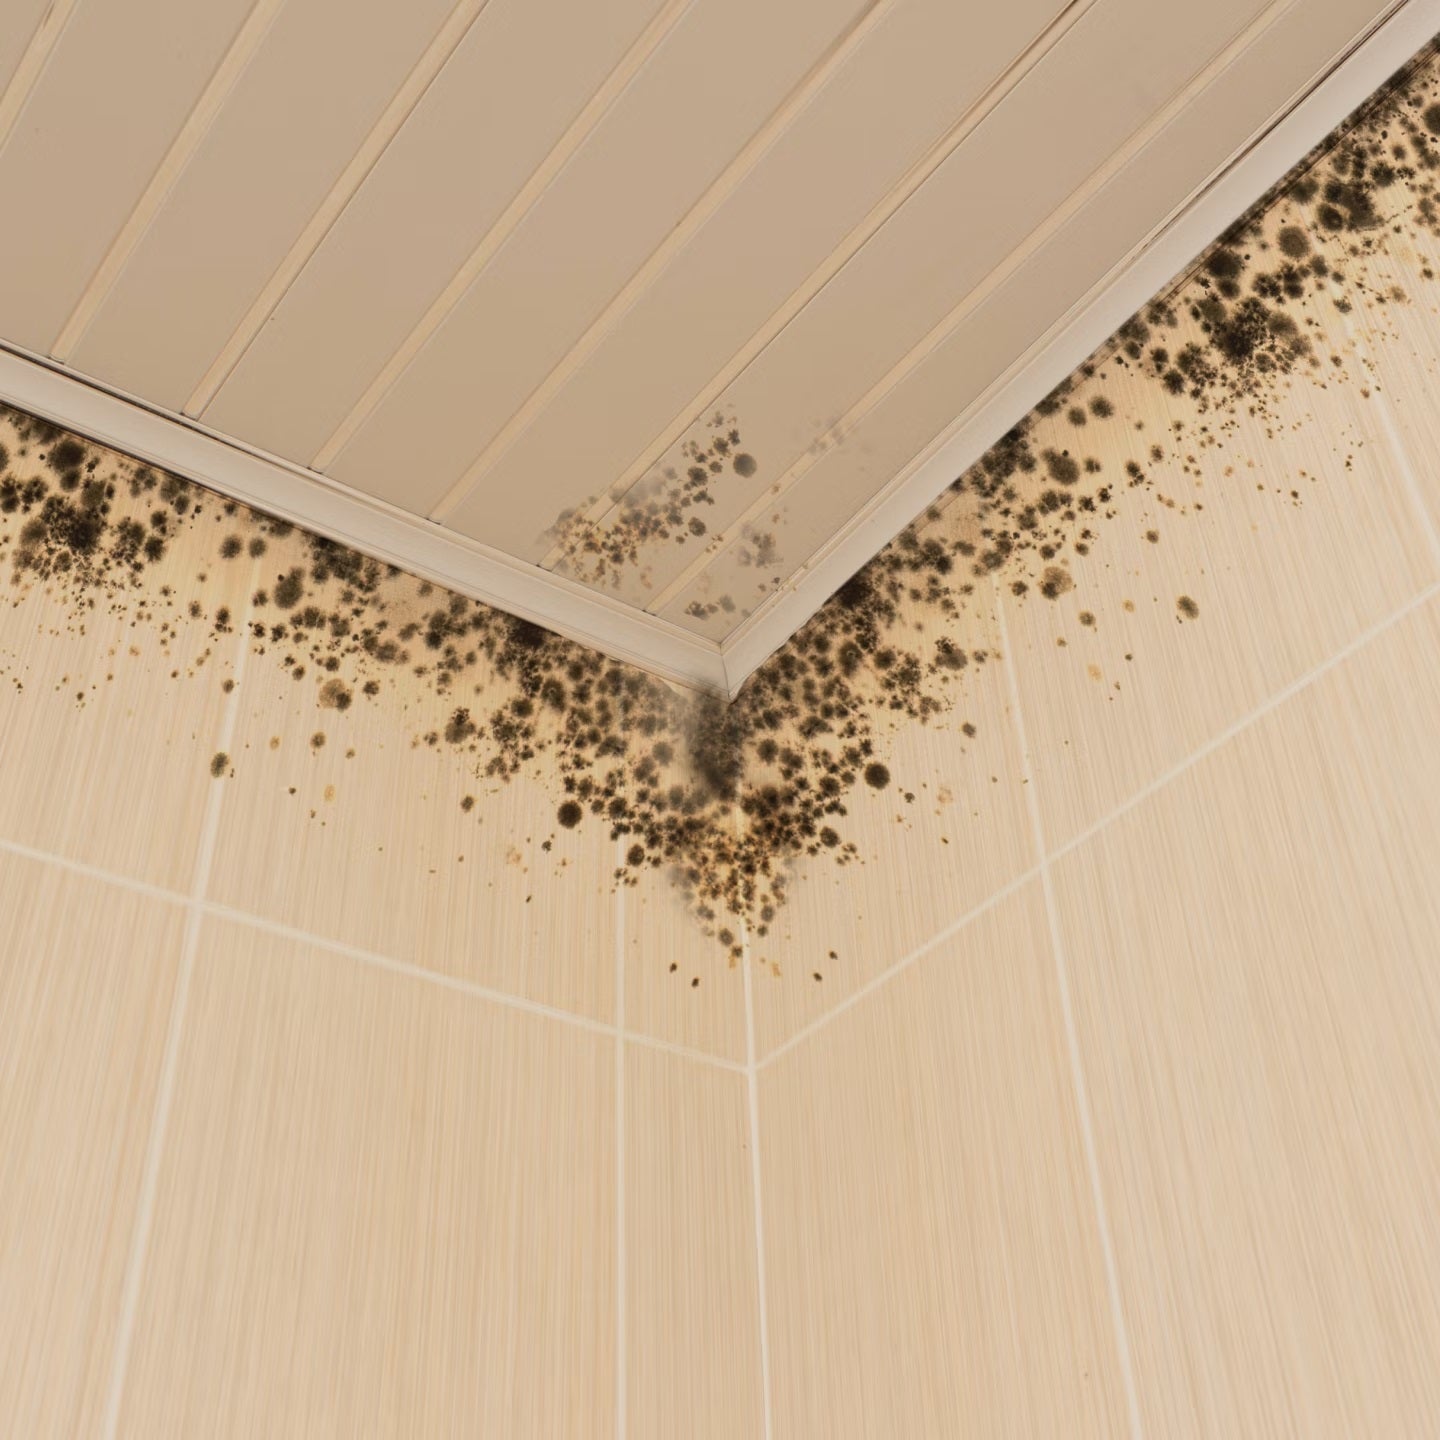 Mold on the walls and ceiling of a home